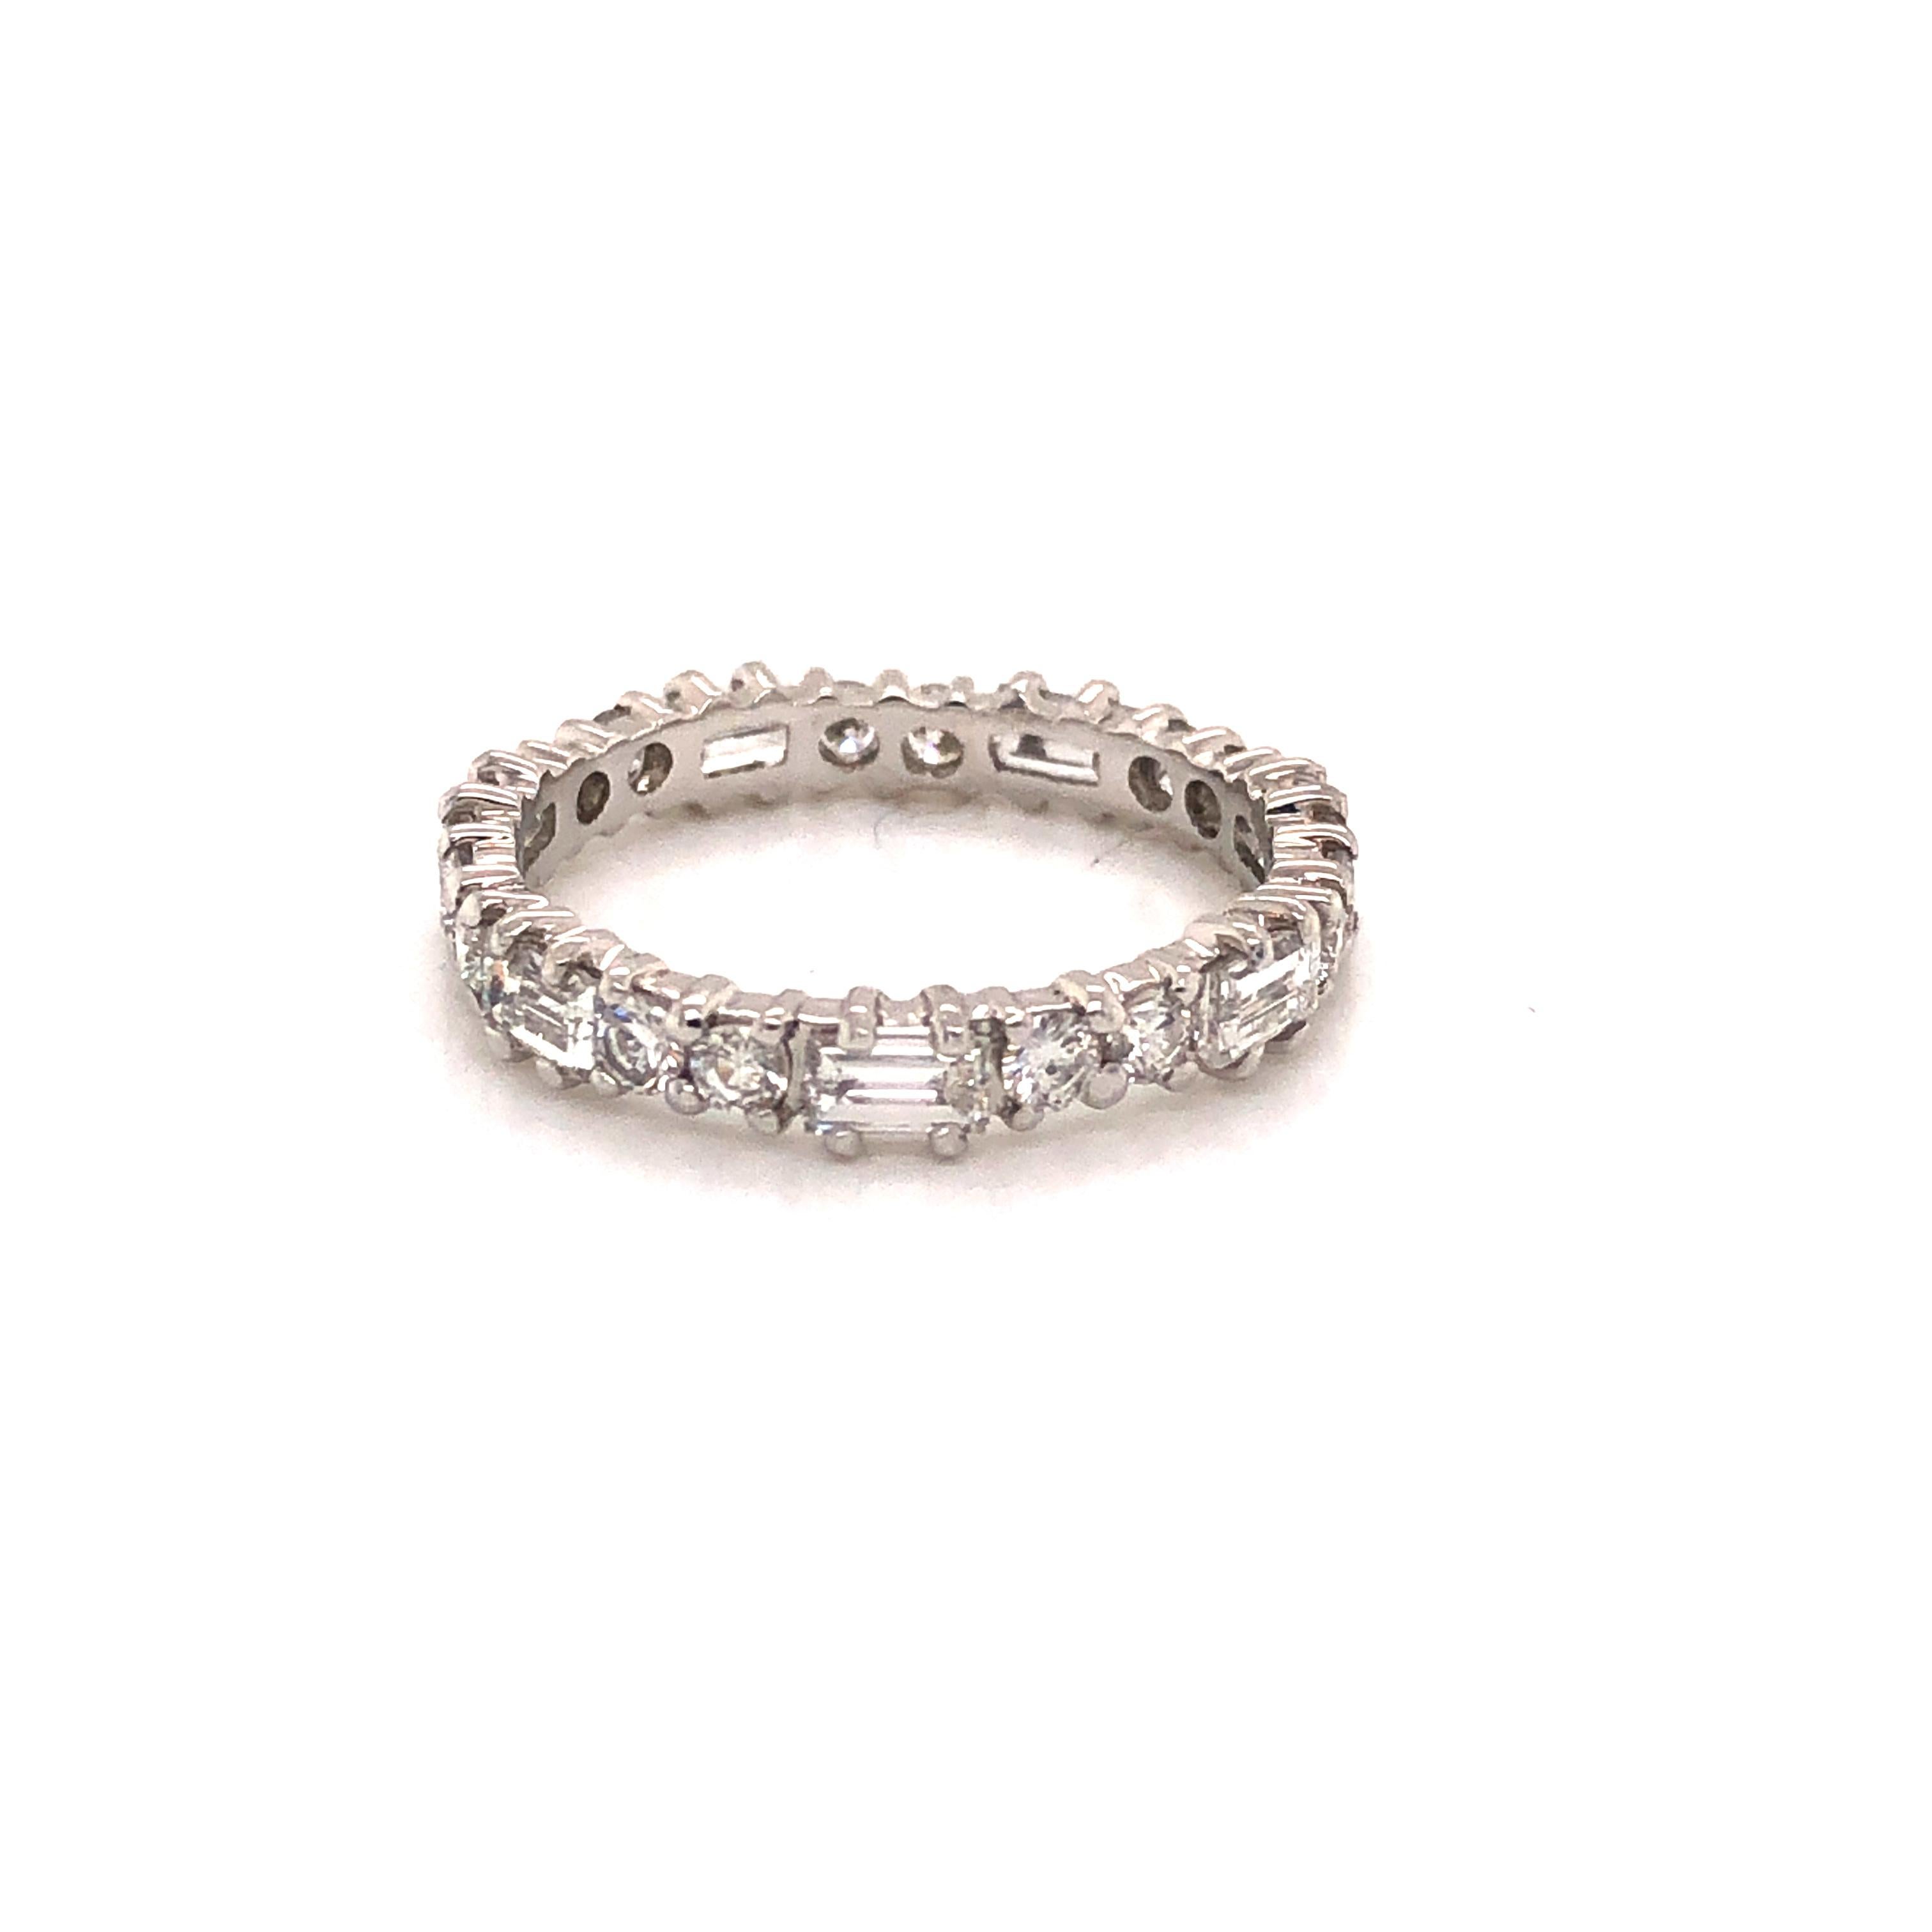 Beautiful ring crafted 18k white gold. The ring is highlighted with natural Baguette and Round cut diamonds. 
This wedding band features alternating diamonds as two rounds are set against east west set baguette cut diamonds, approximately 1.68